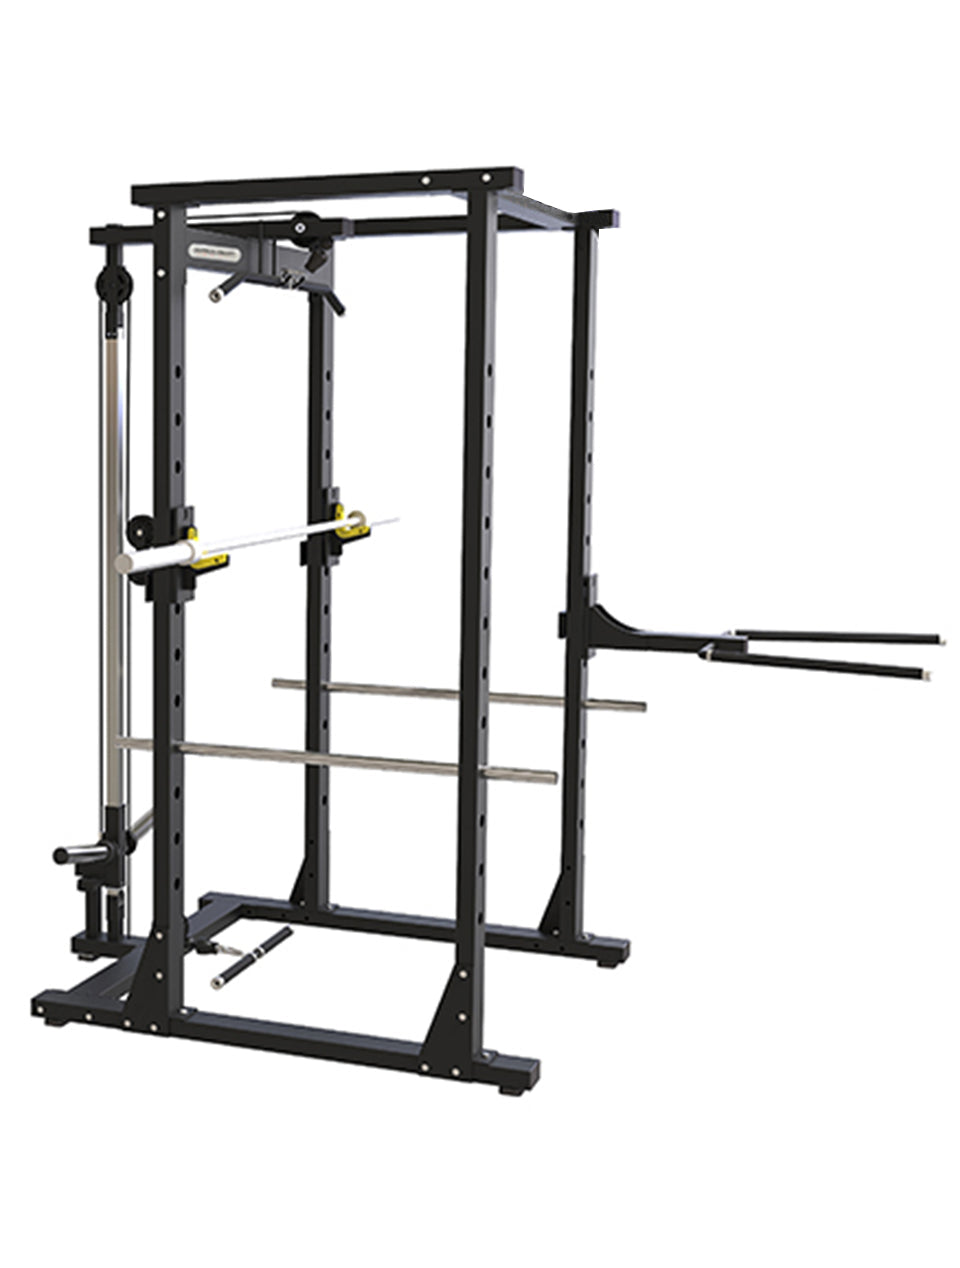 1441 Fitness Multifunction Power Cage Squat Rack with Lat pull down - 41FA3048